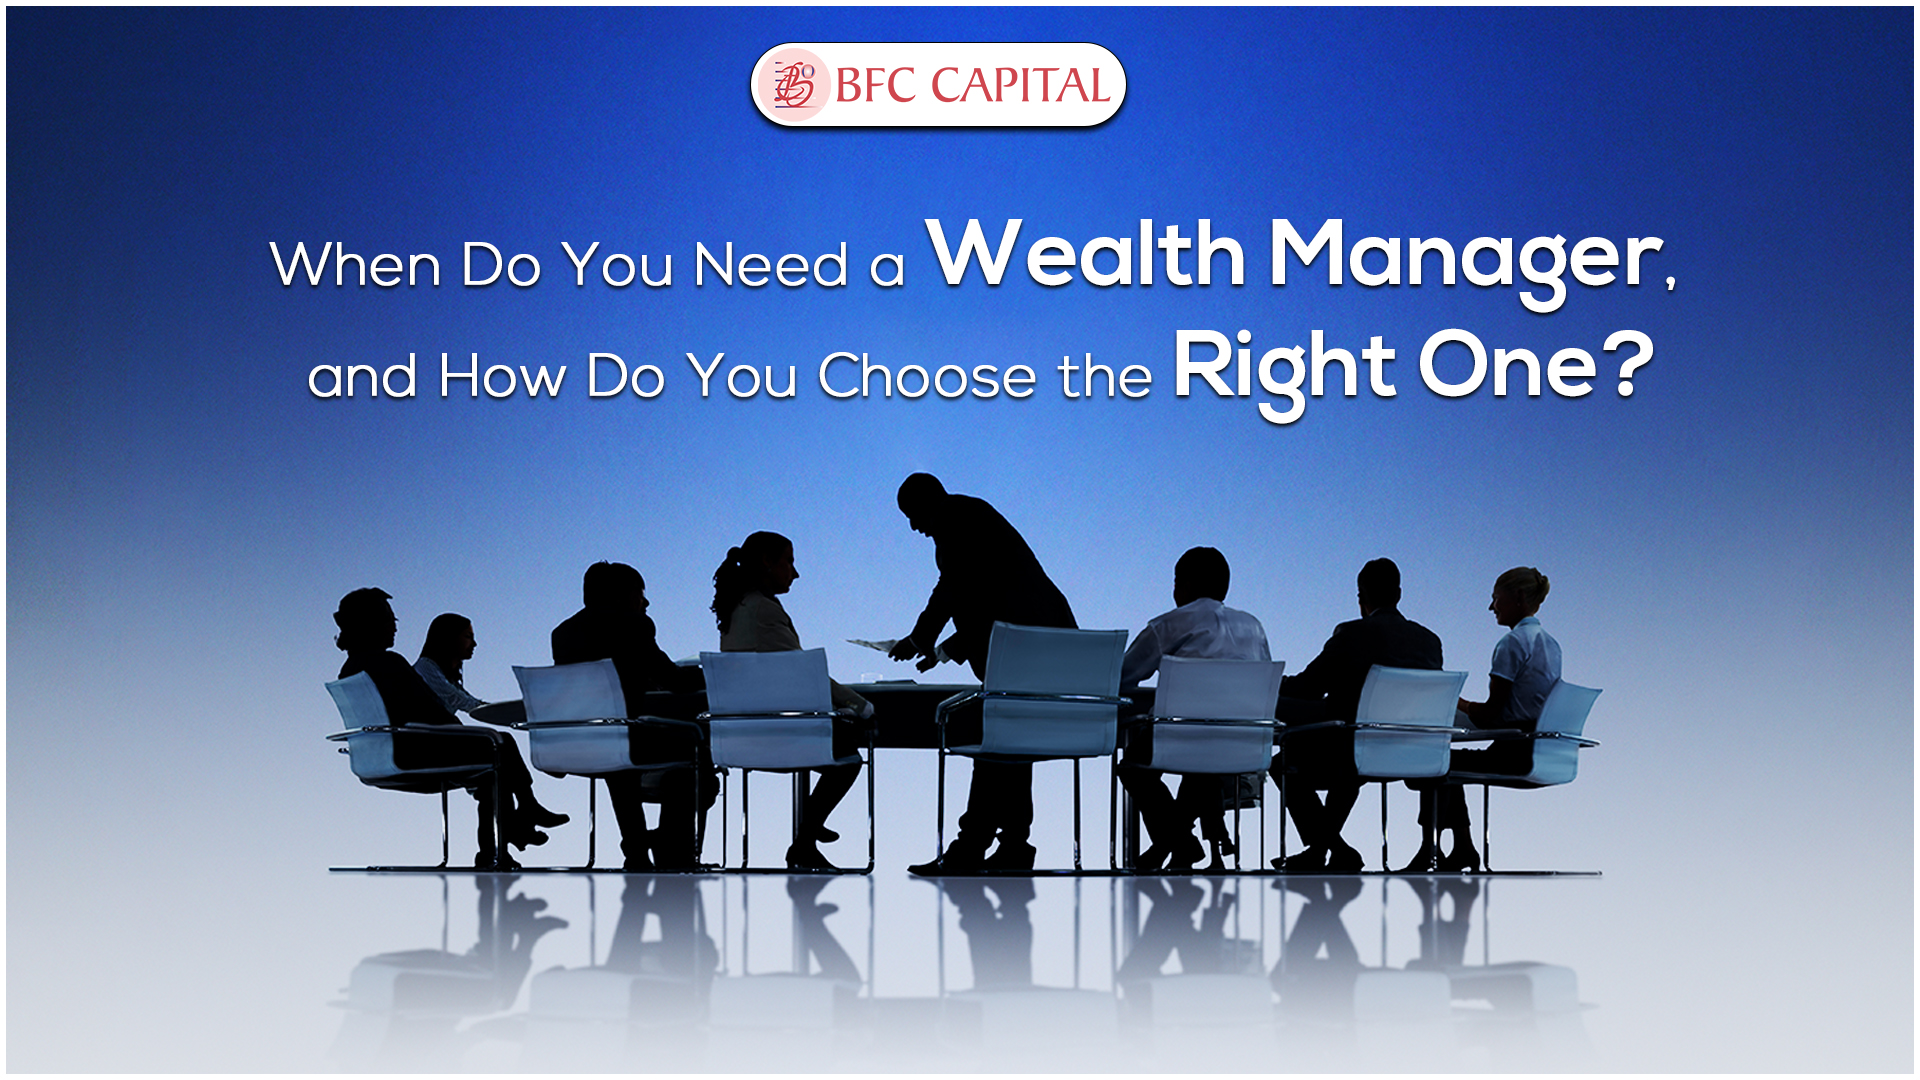 When Do You Need a Wealth Manager, and How Do You Choose the Right One?